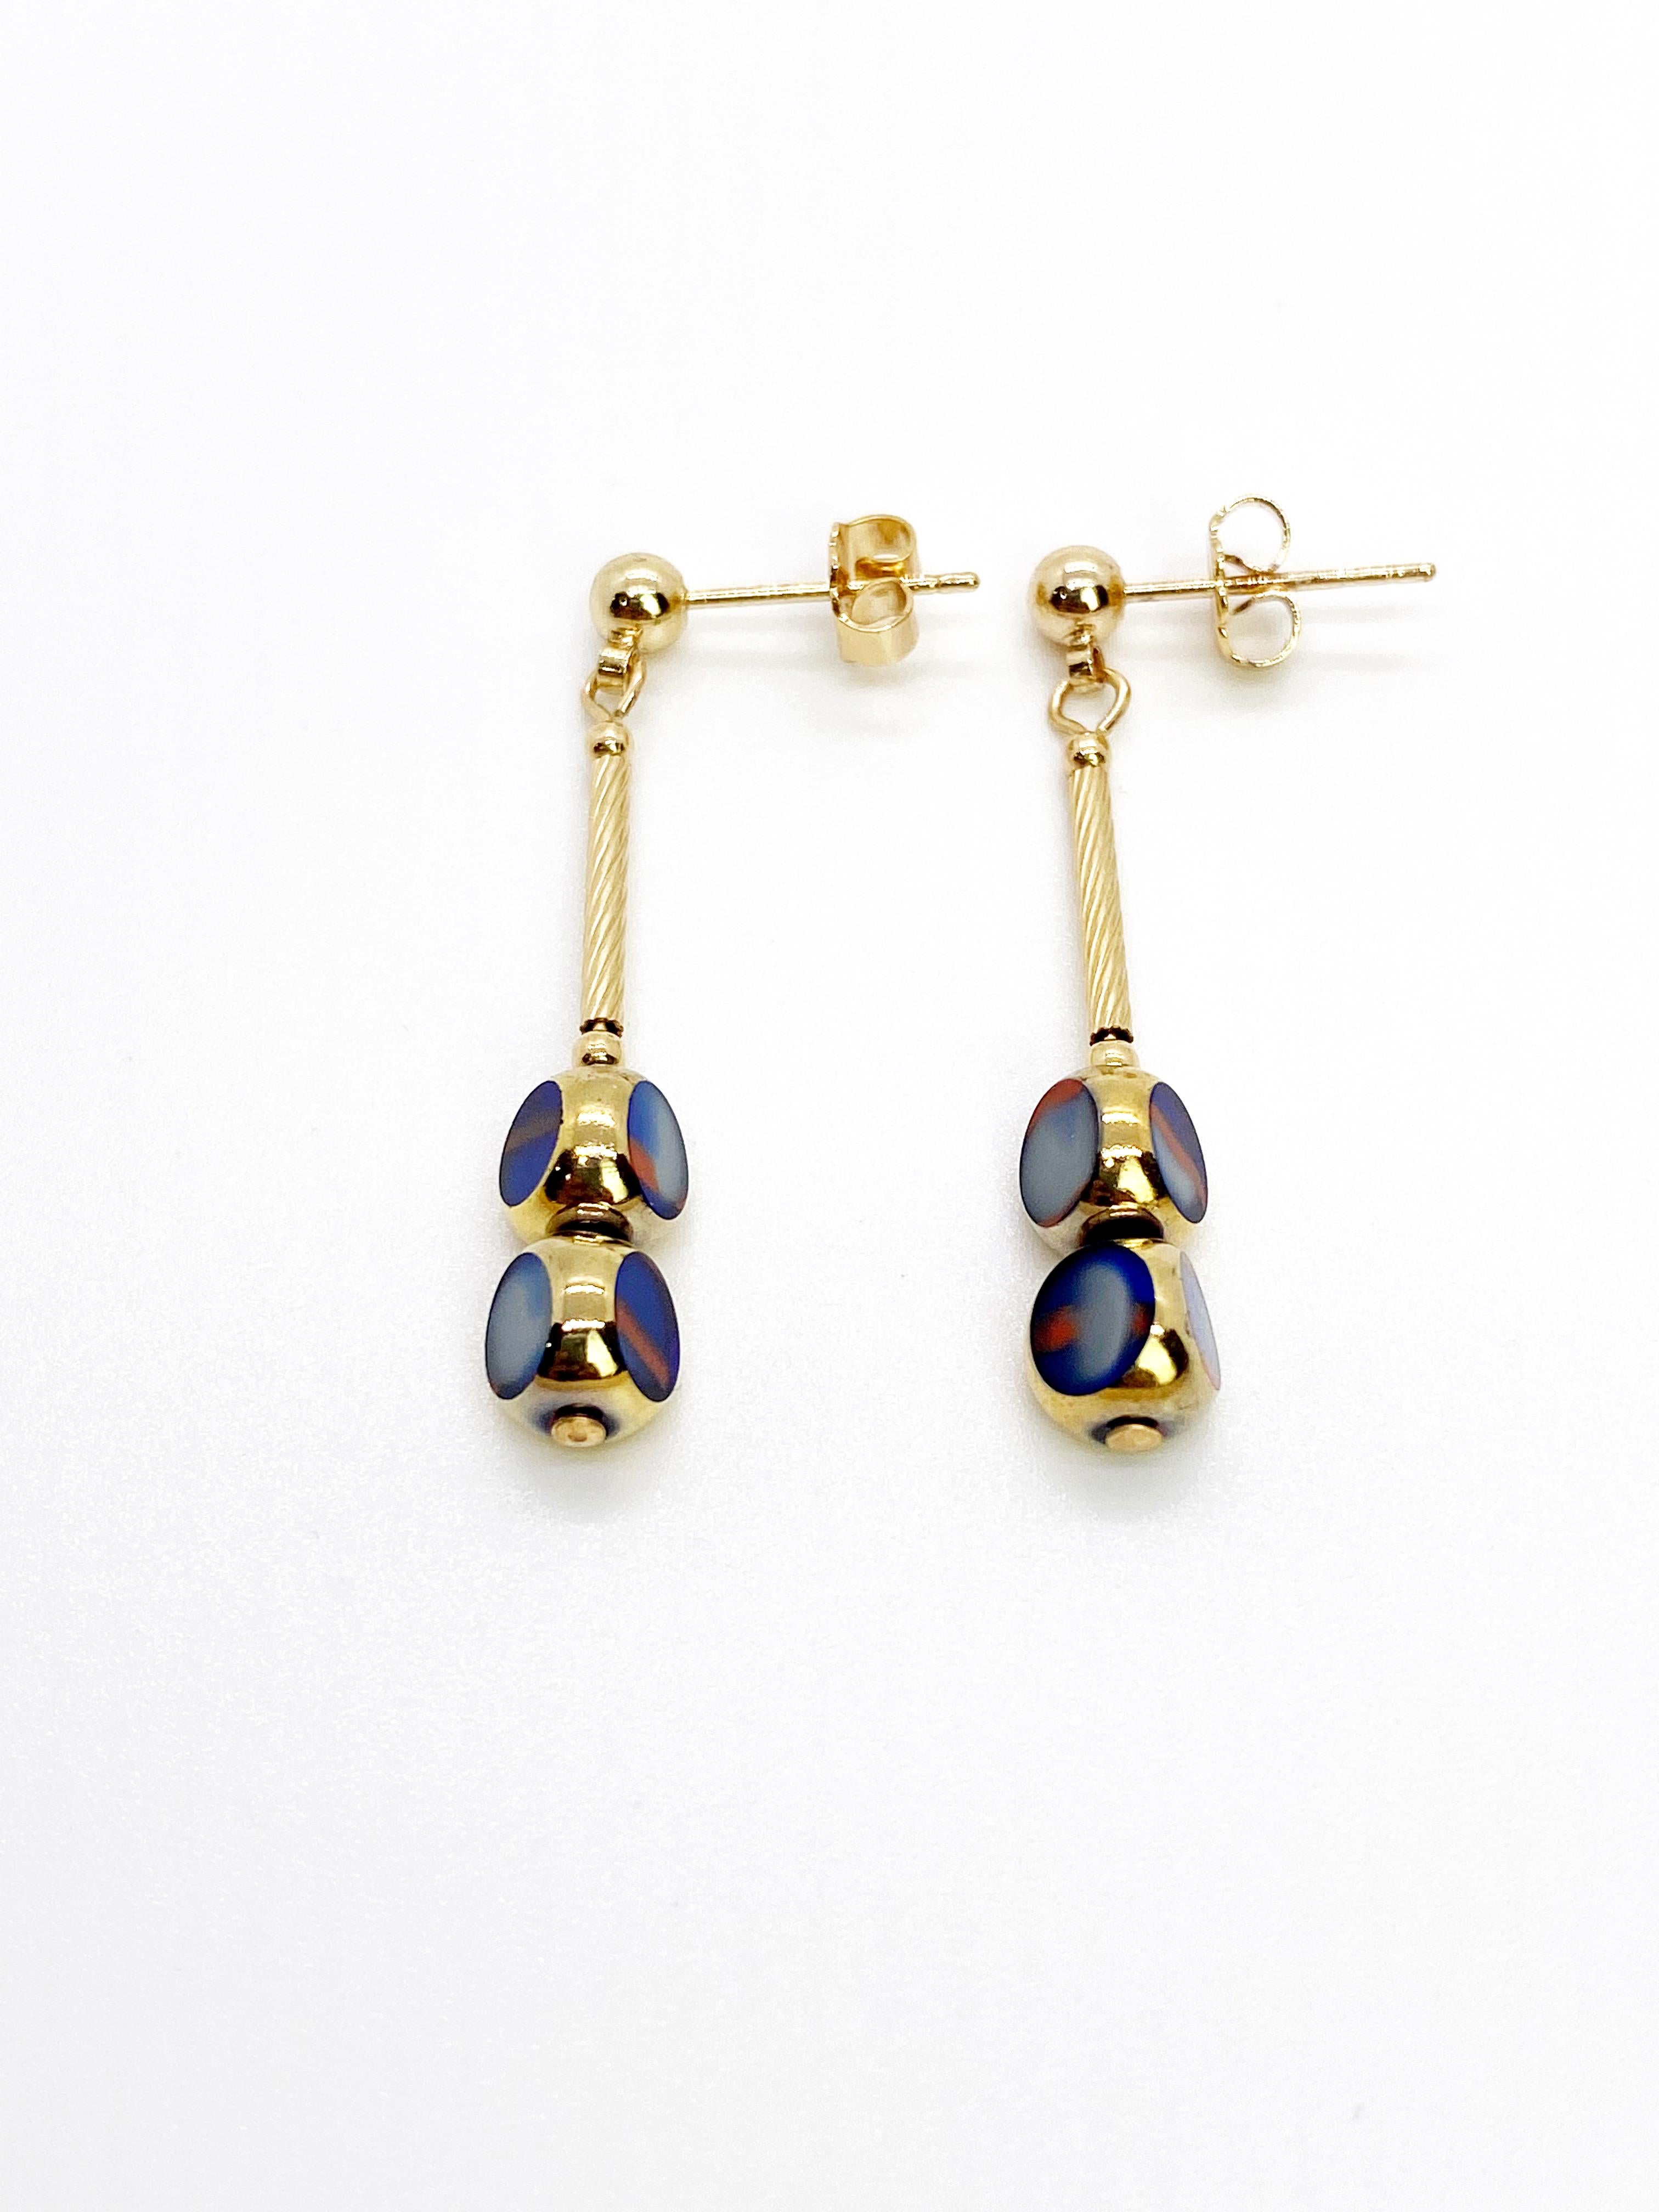 Mini blue marbled vintage German glass beads edged with 24K gold dangles on 14K gold filled metals and ear stud.

The German vintage glass beads are considered rare and collectible, circa 1920s-1960s.

*Our jewelry have maximum protection for